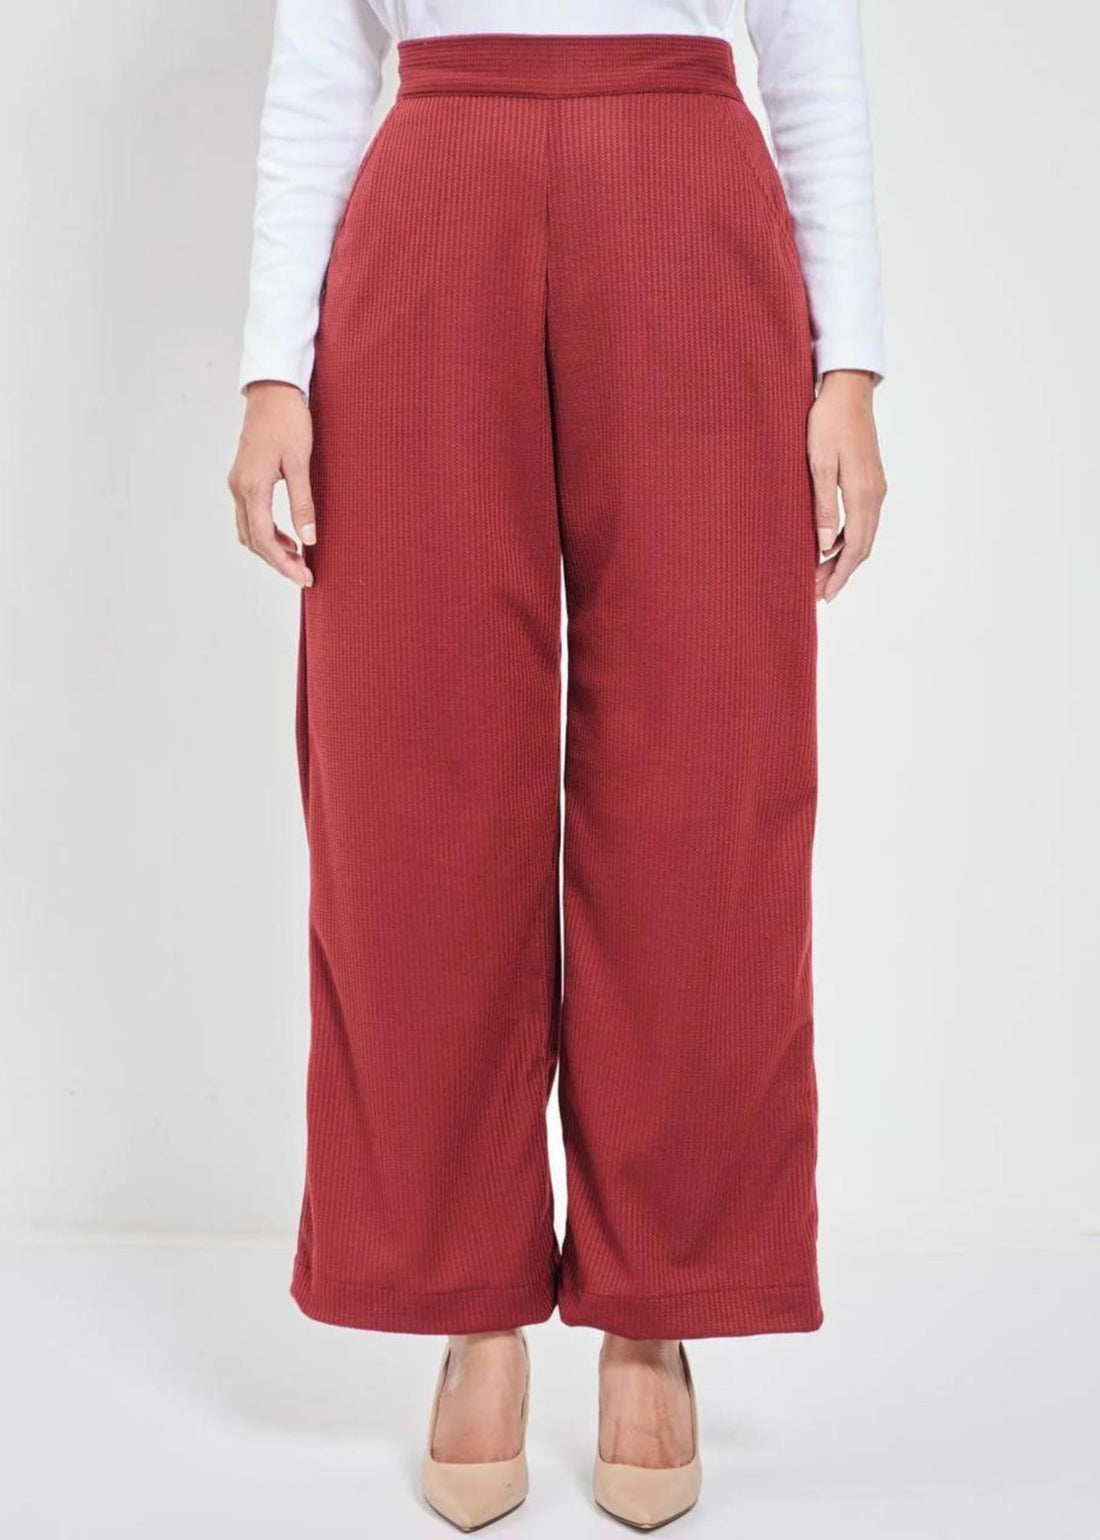 DONNA Straight Cut Pants in Ruby Red